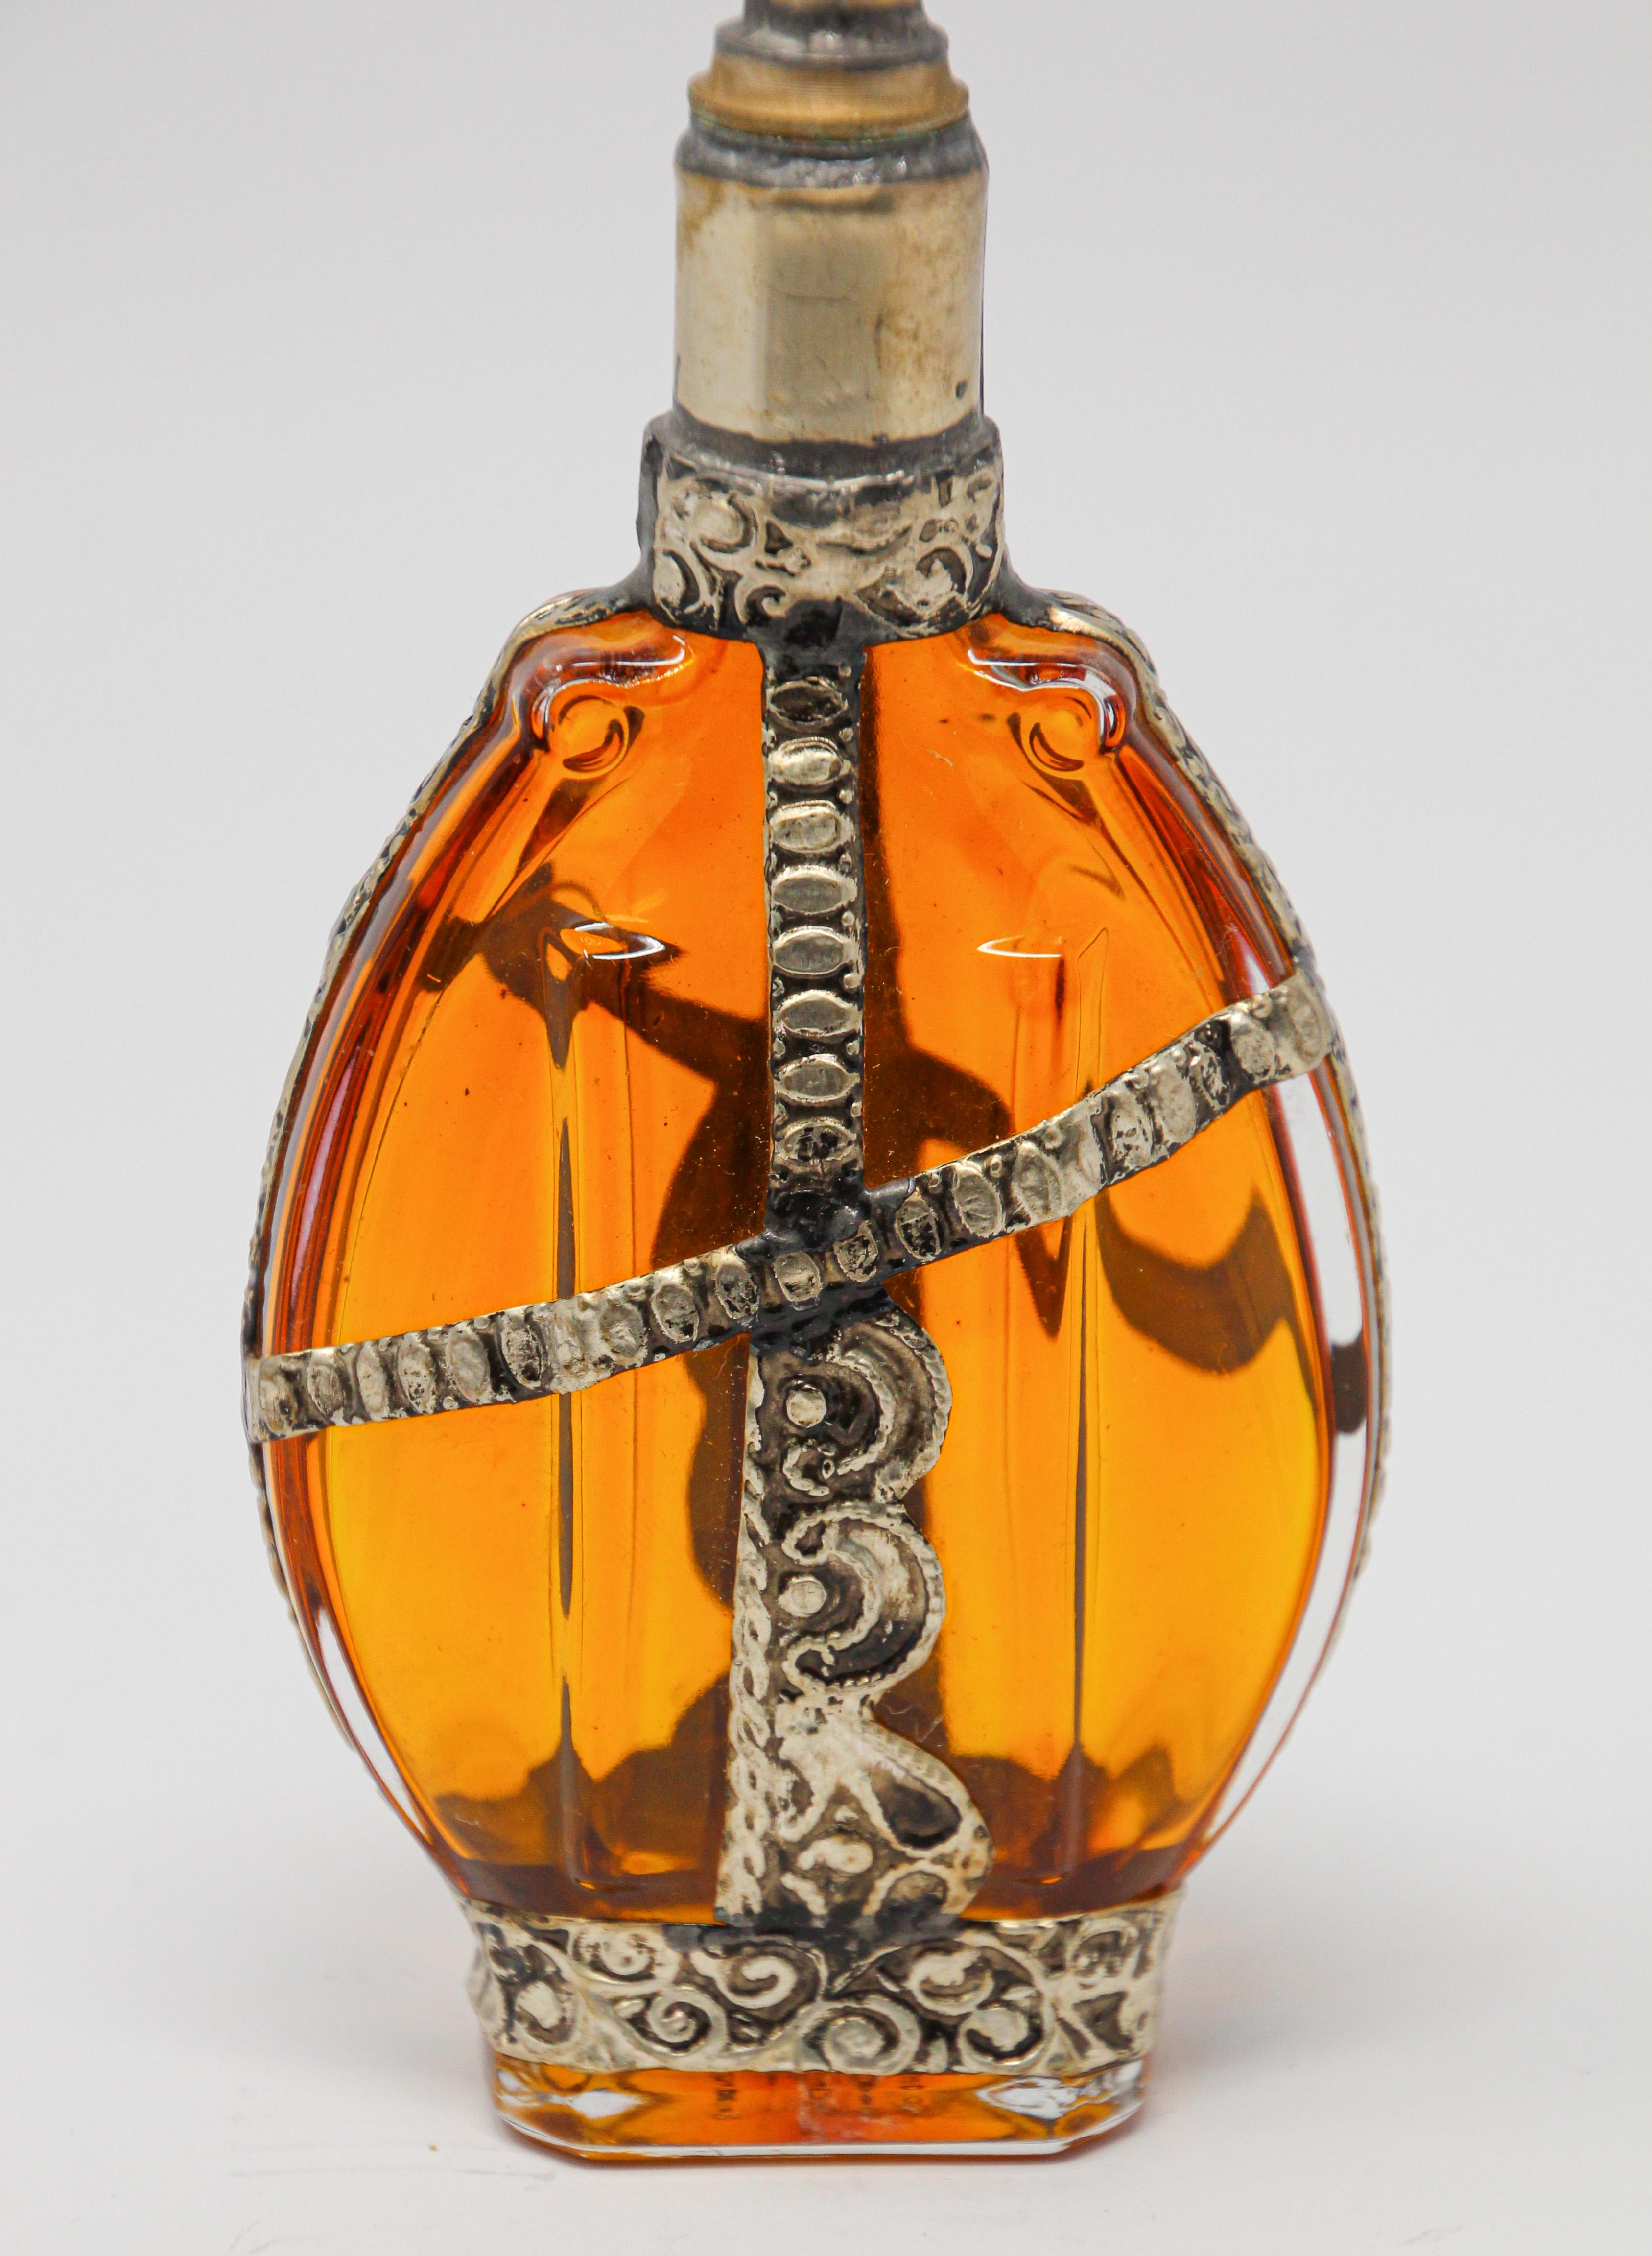 Handcrafted Moroccan Moorish amber painted glass perfume bottle or rose water sprinkler with raised embossed silvered metal floral design over amber glass.
The pressed glass bottle in Art Deco, Art Nouveau style is oval shape with curved sides and